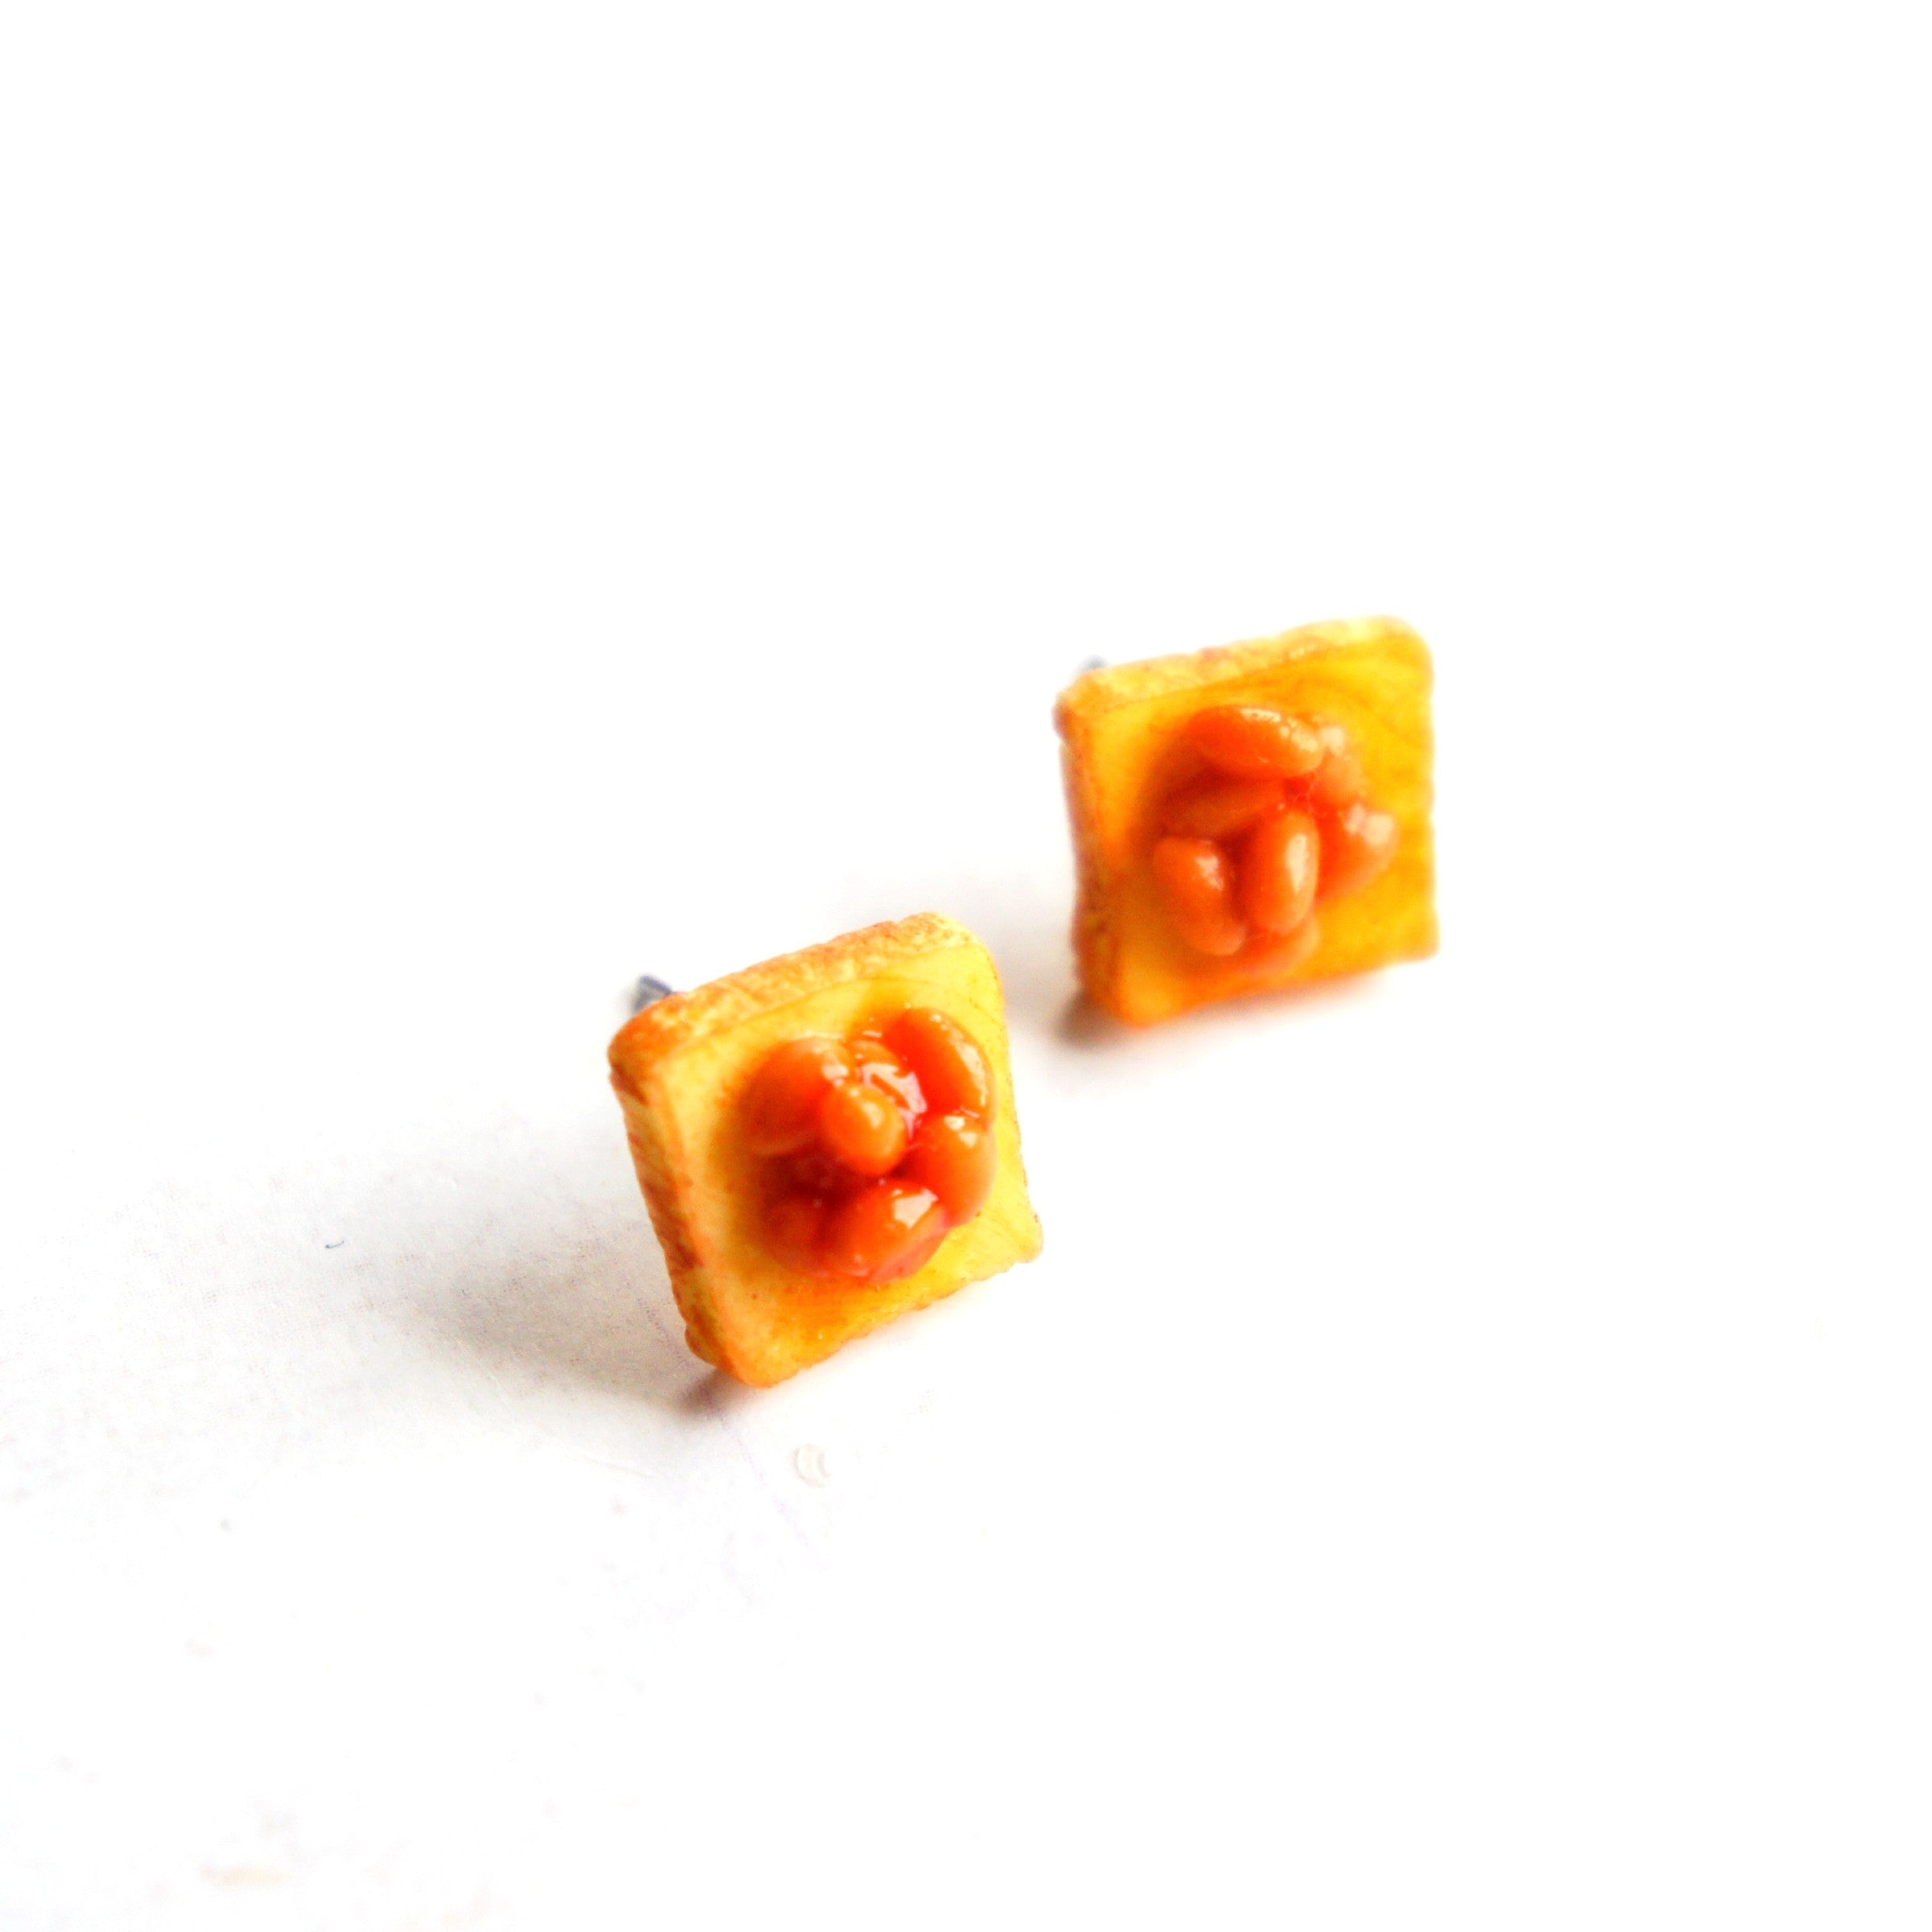 Beans Bread Toasts Stud Earrings - Jillicious charms and accessories